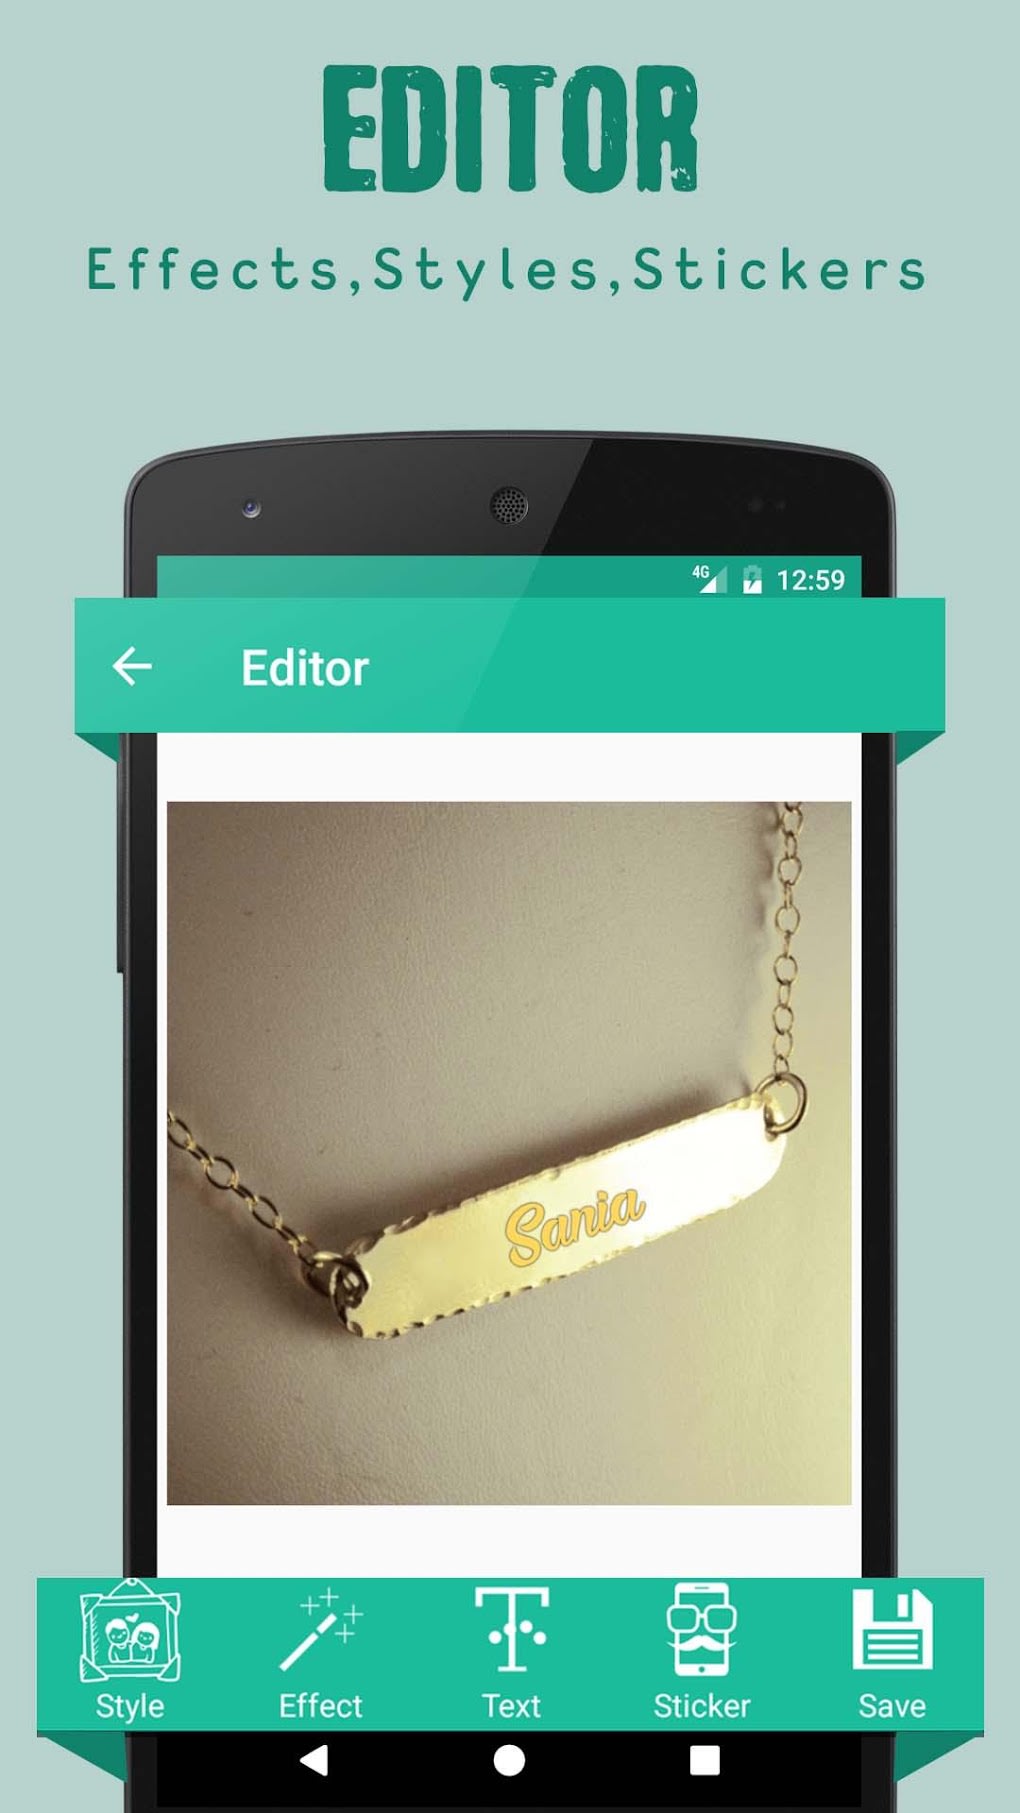 Stylish Name Maker for Android - Download